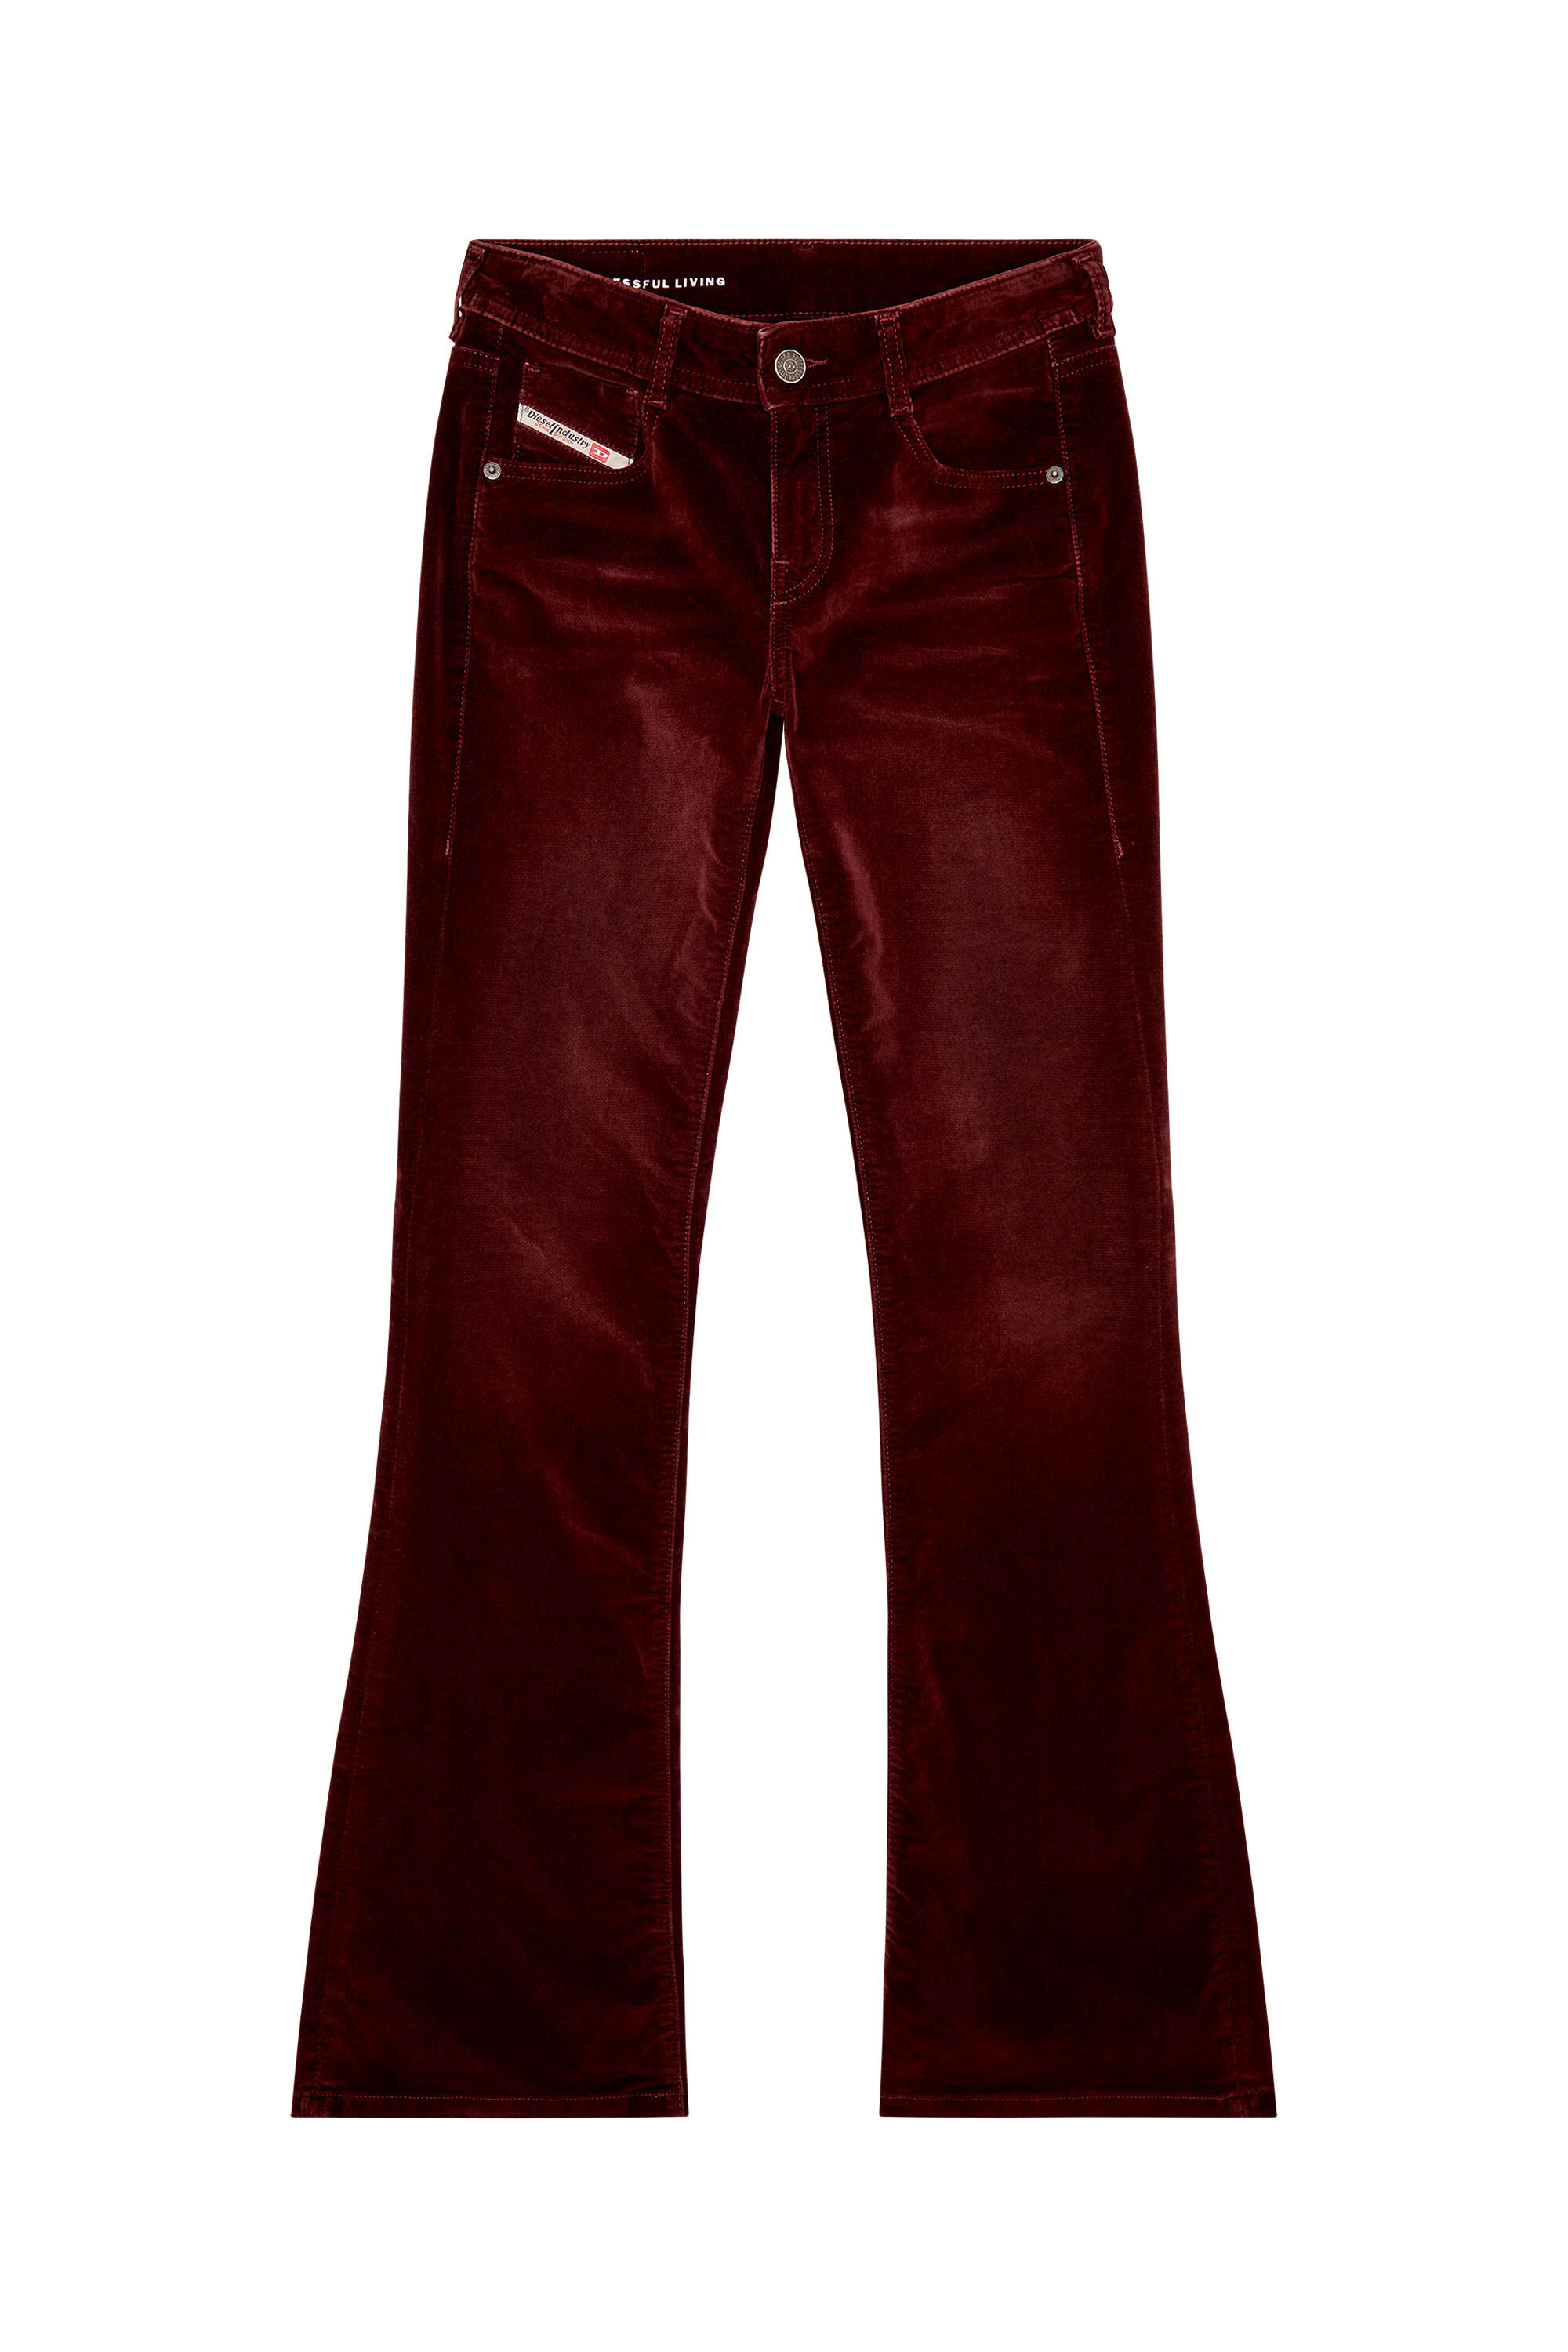 Women's Bootcut and Flare Jeans, Colored